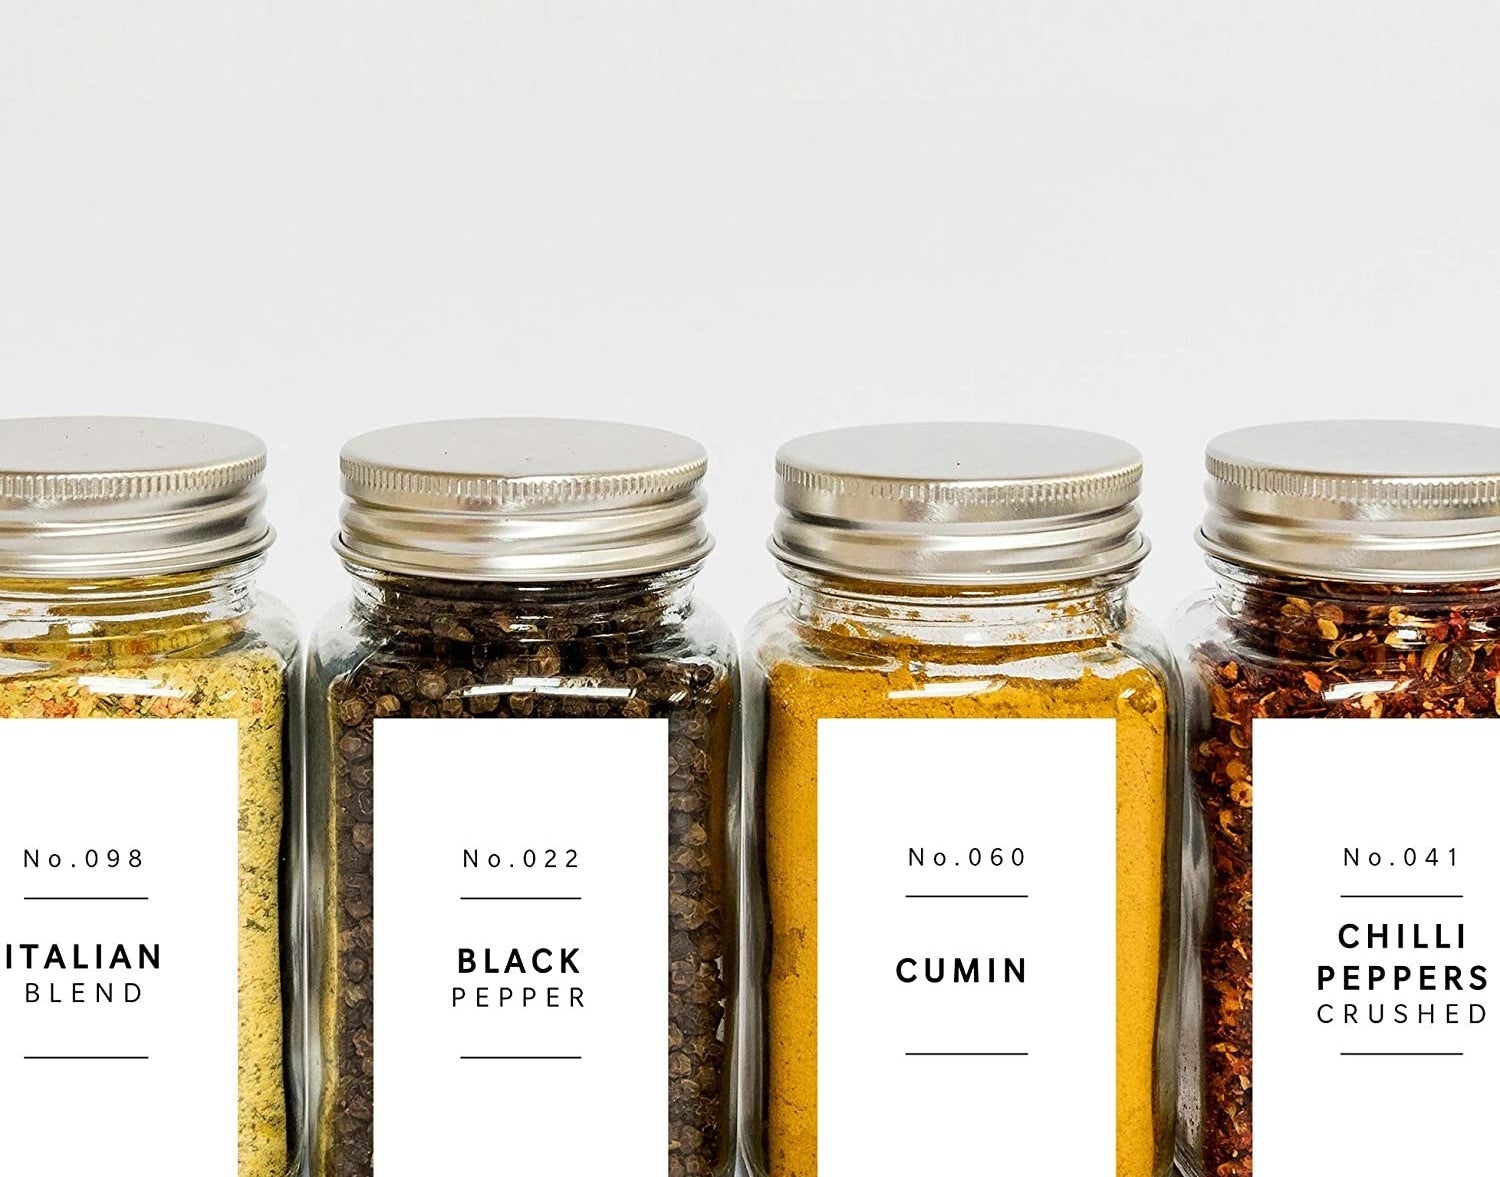 A set of spice jars with neat minimalist labels on the front